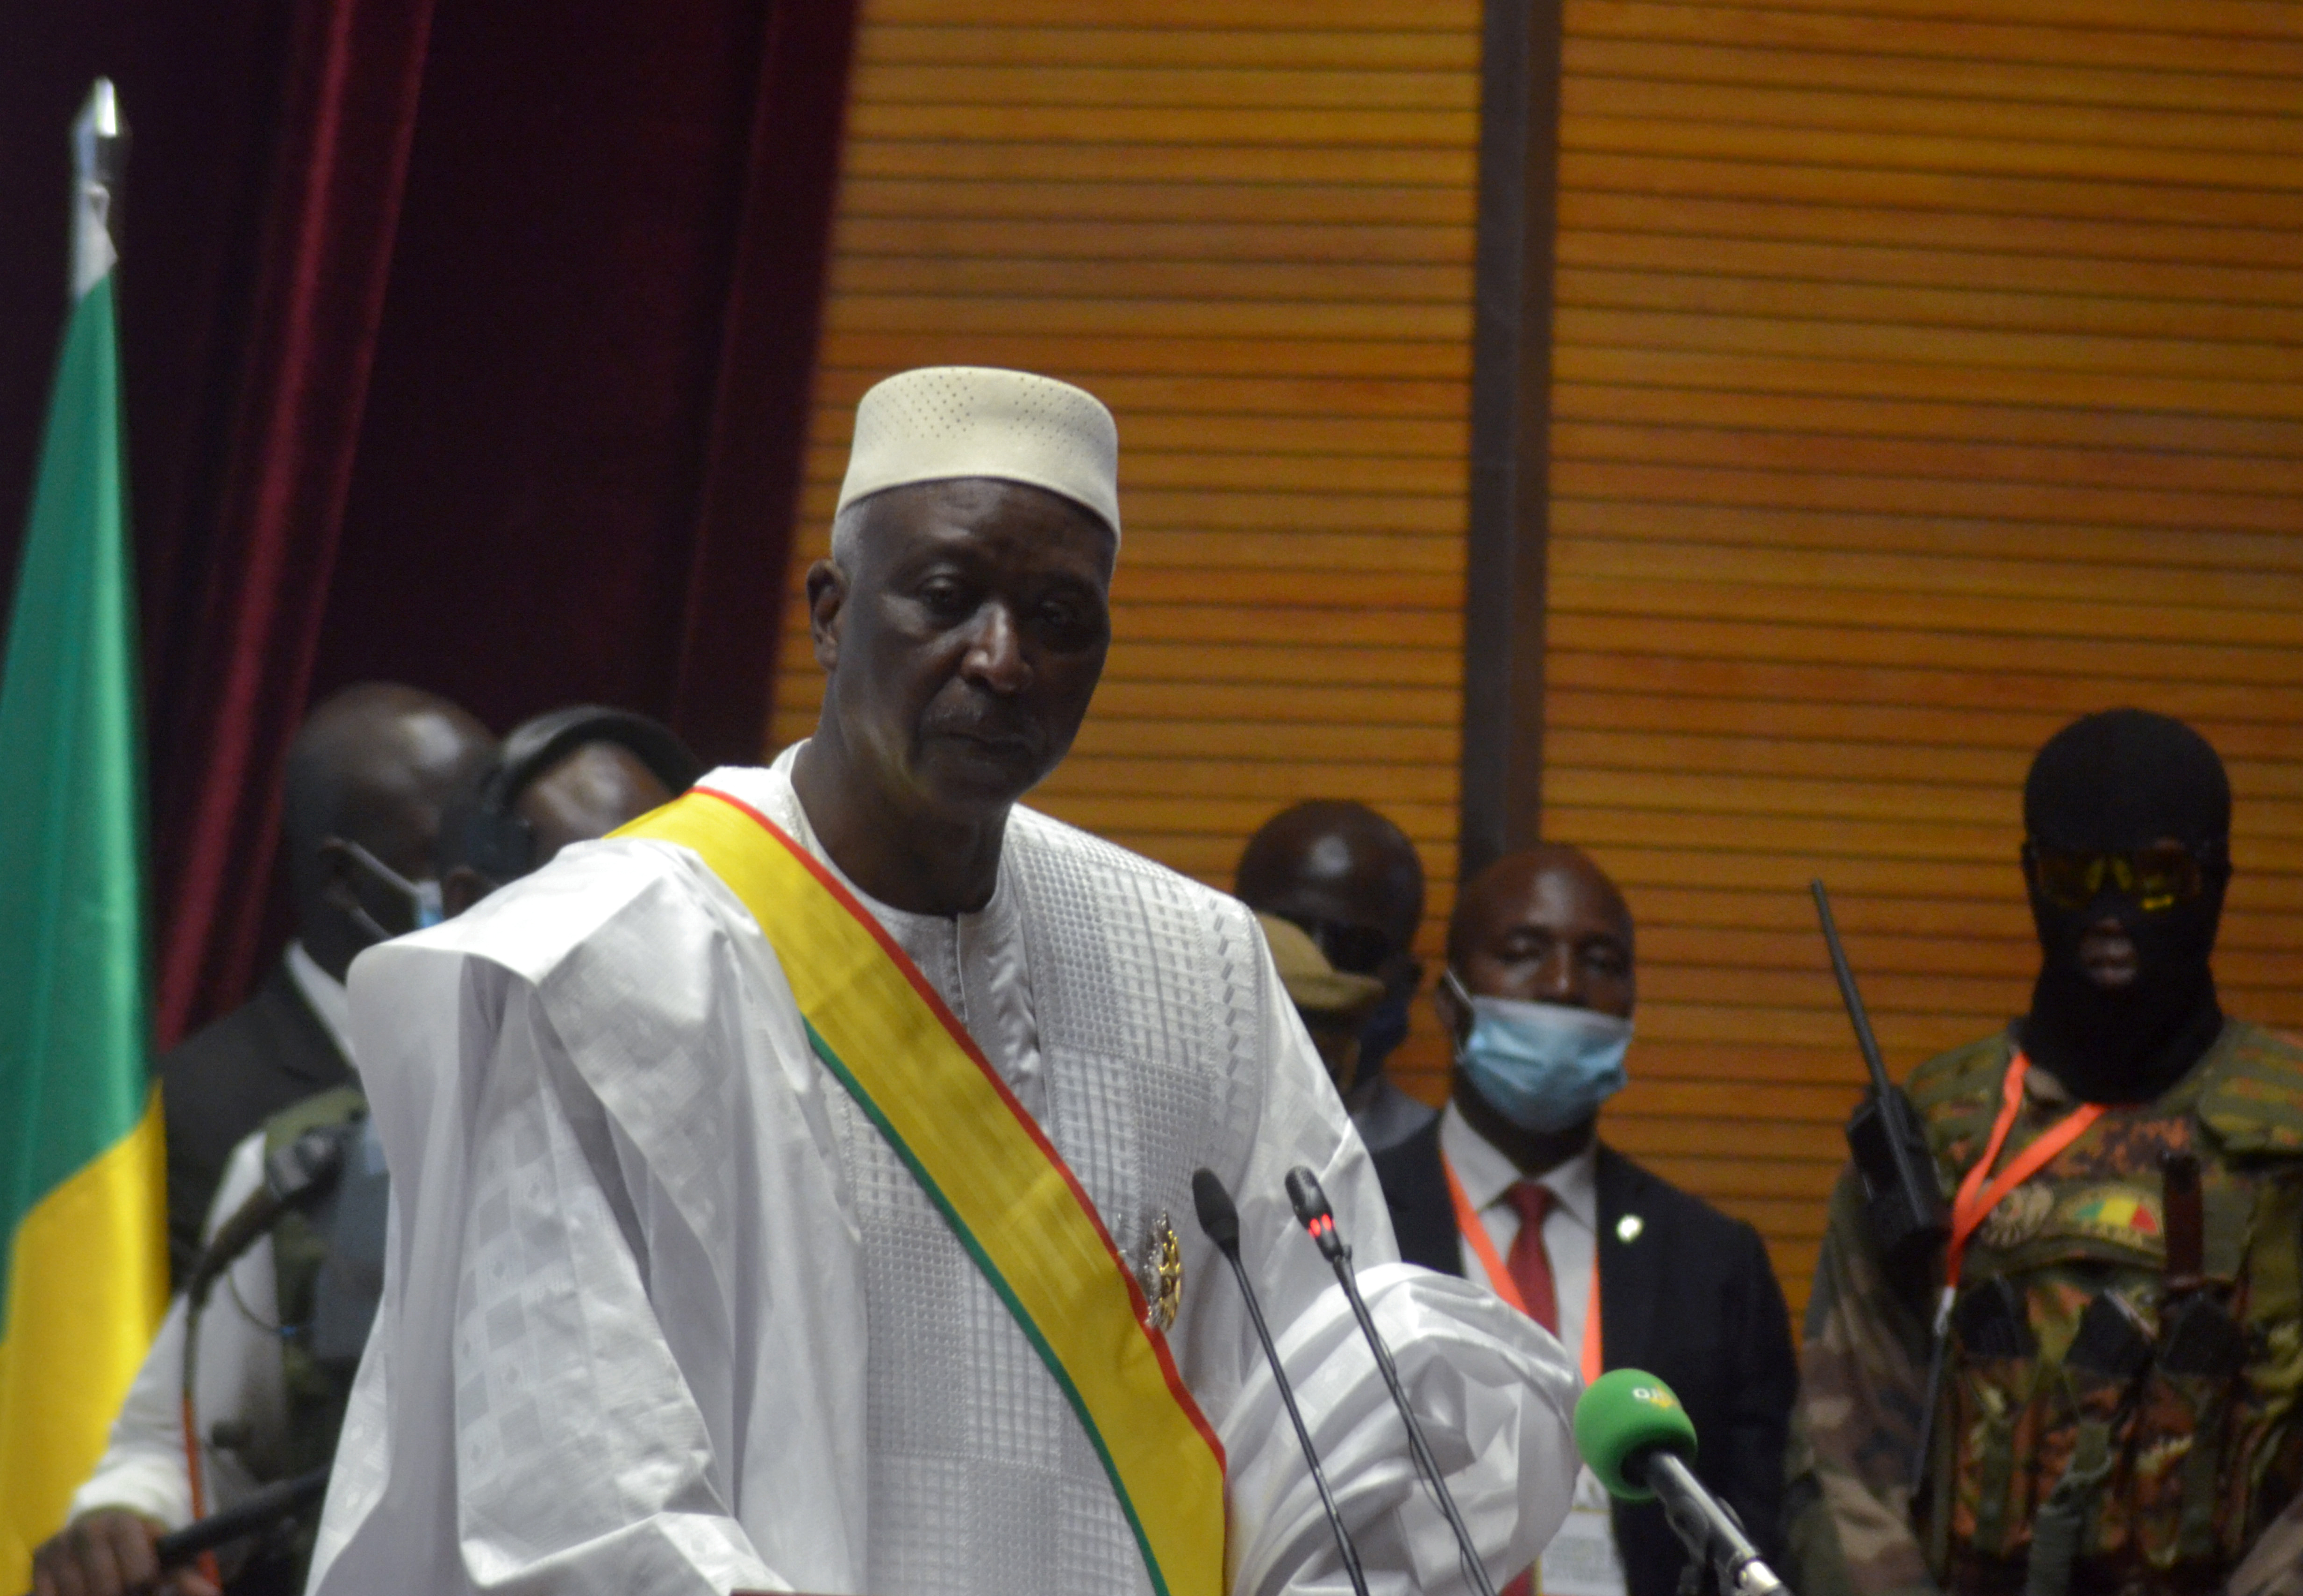 The new interim president of Mali Bah Ndaw speaks during the Inauguration ceremony in Bamako